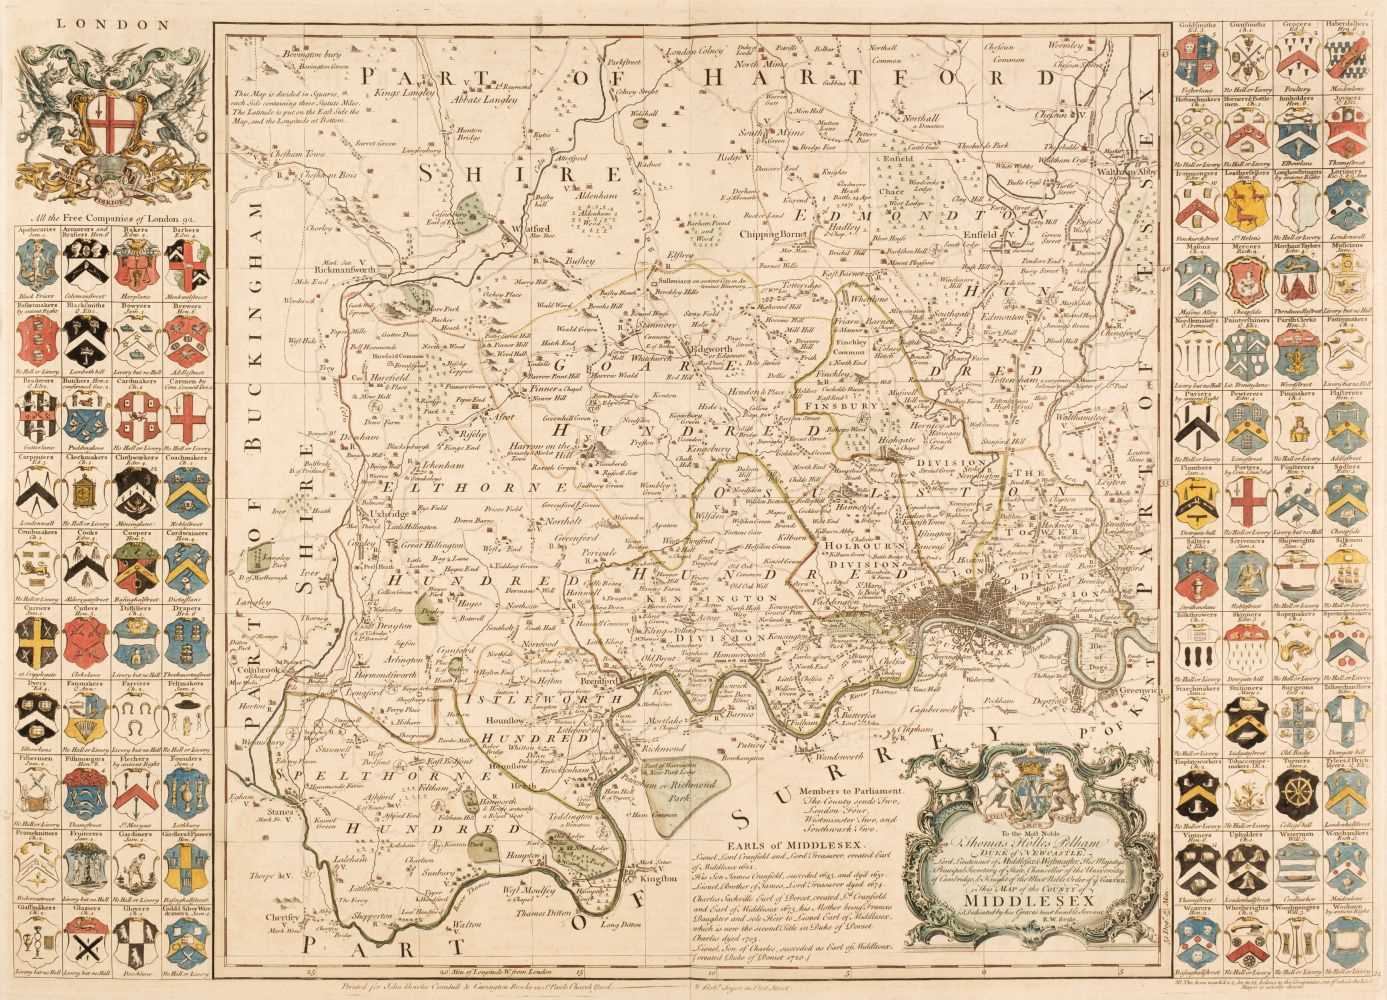 Lot 120 - Middlesex. Seale (R. W.), Map of Middlesex, 1765